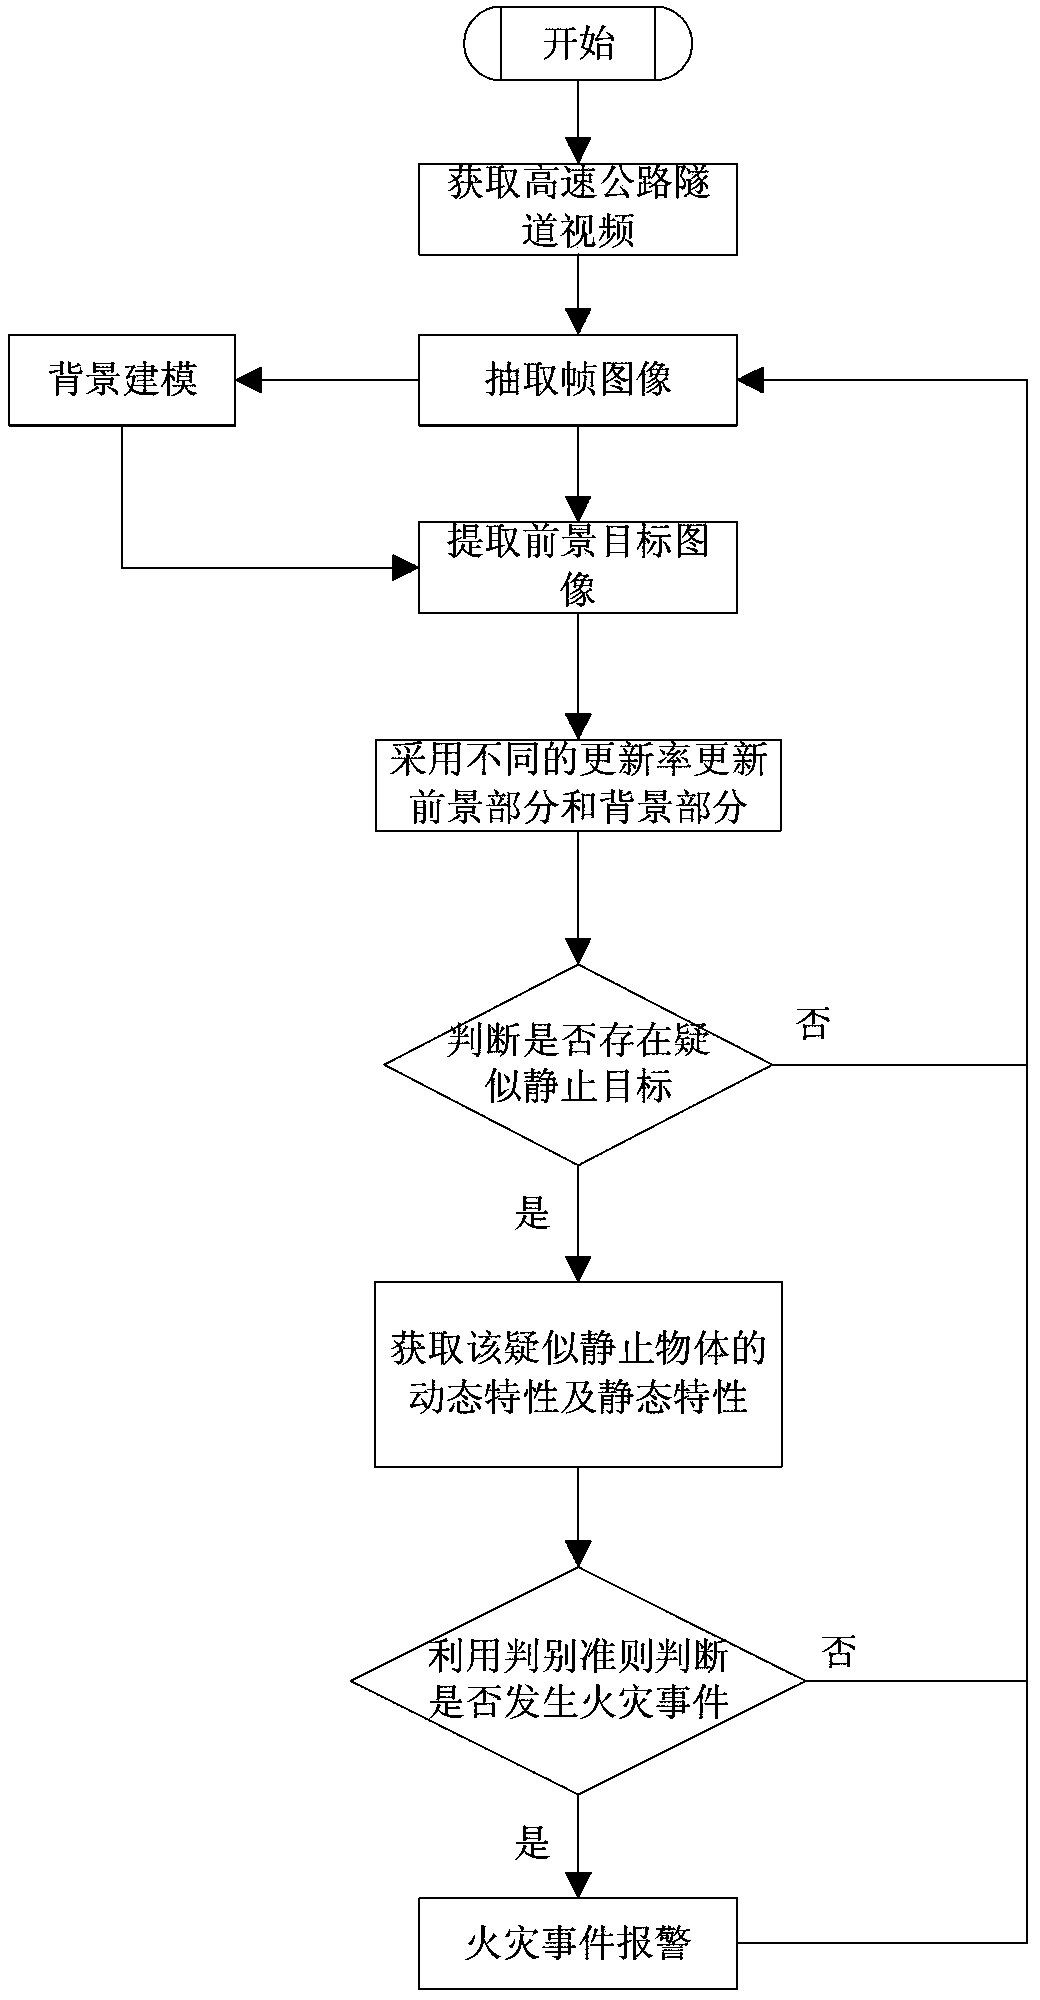 Method for detecting fire accident on expressway or in tunnel based on video detection technology